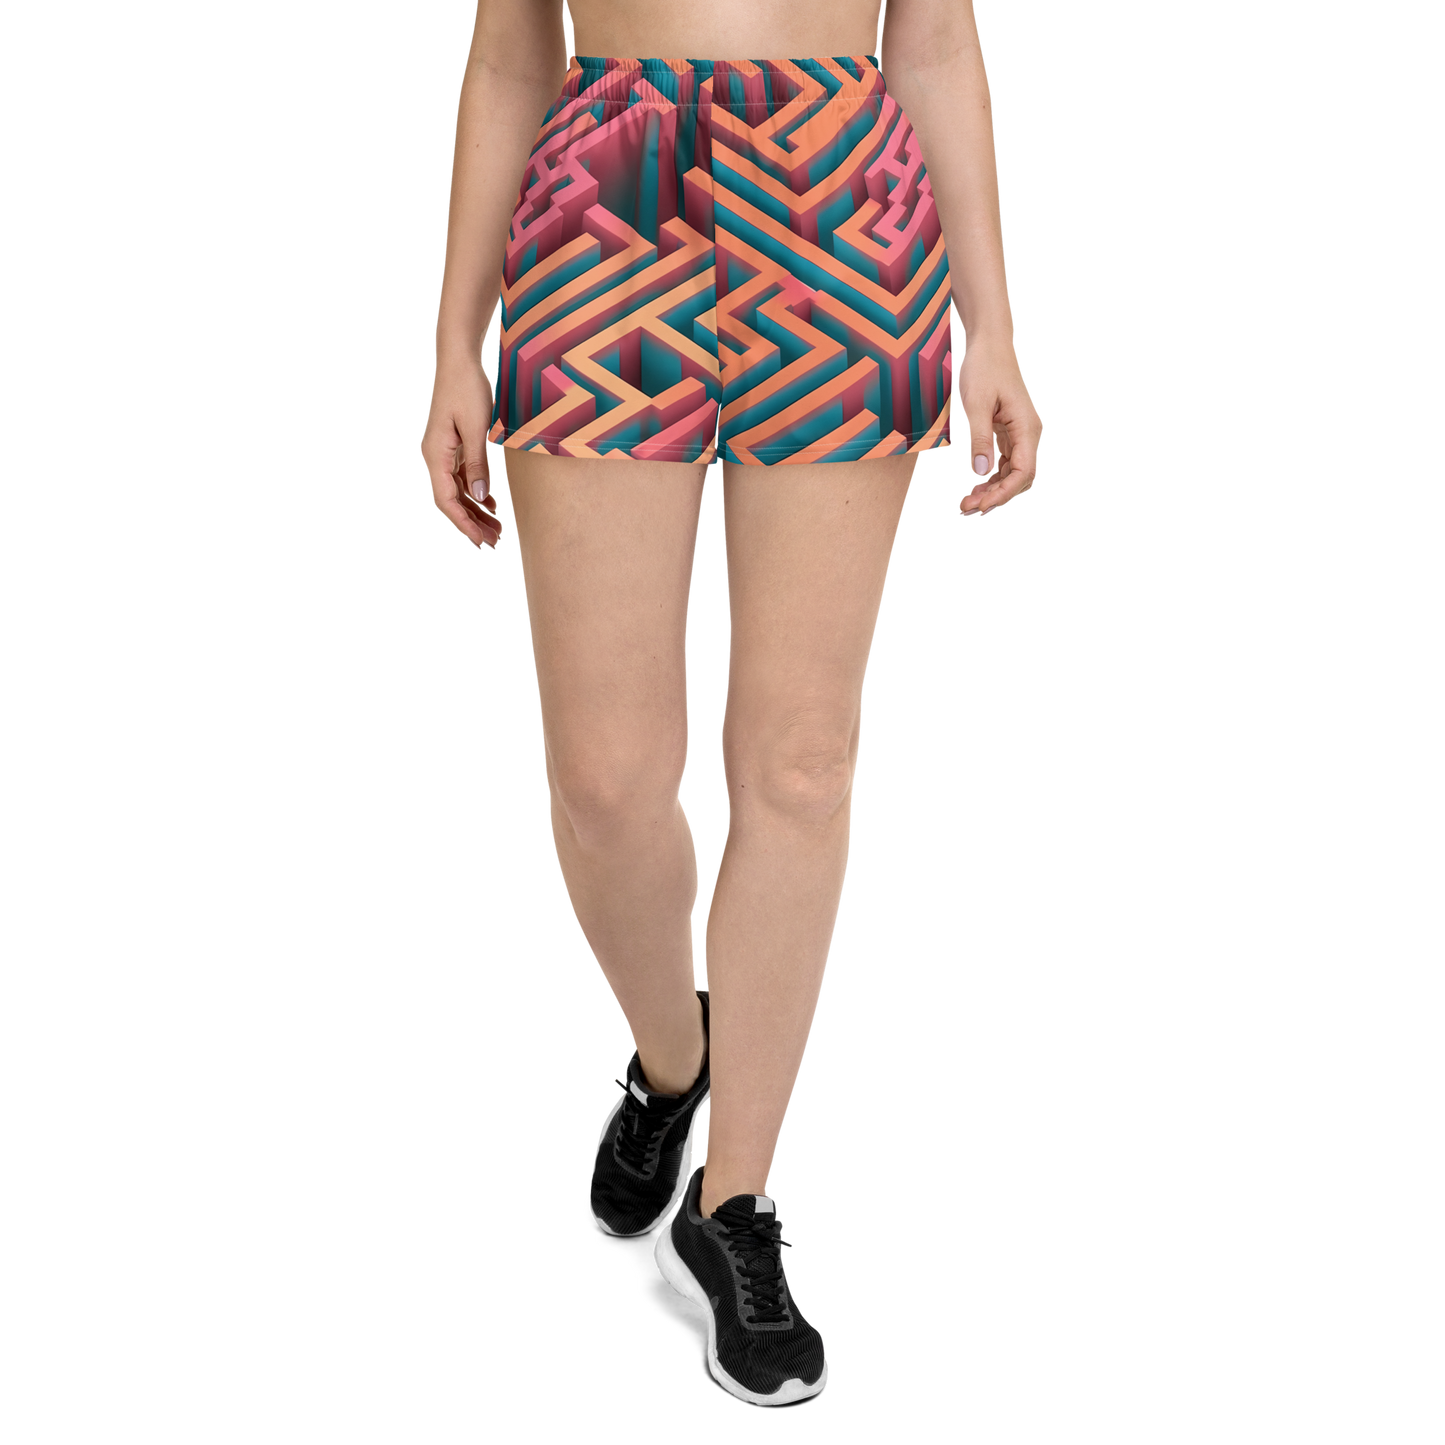 3D Maze Illusion | 3D Patterns | All-Over Print Women’s Recycled Athletic Shorts - #1